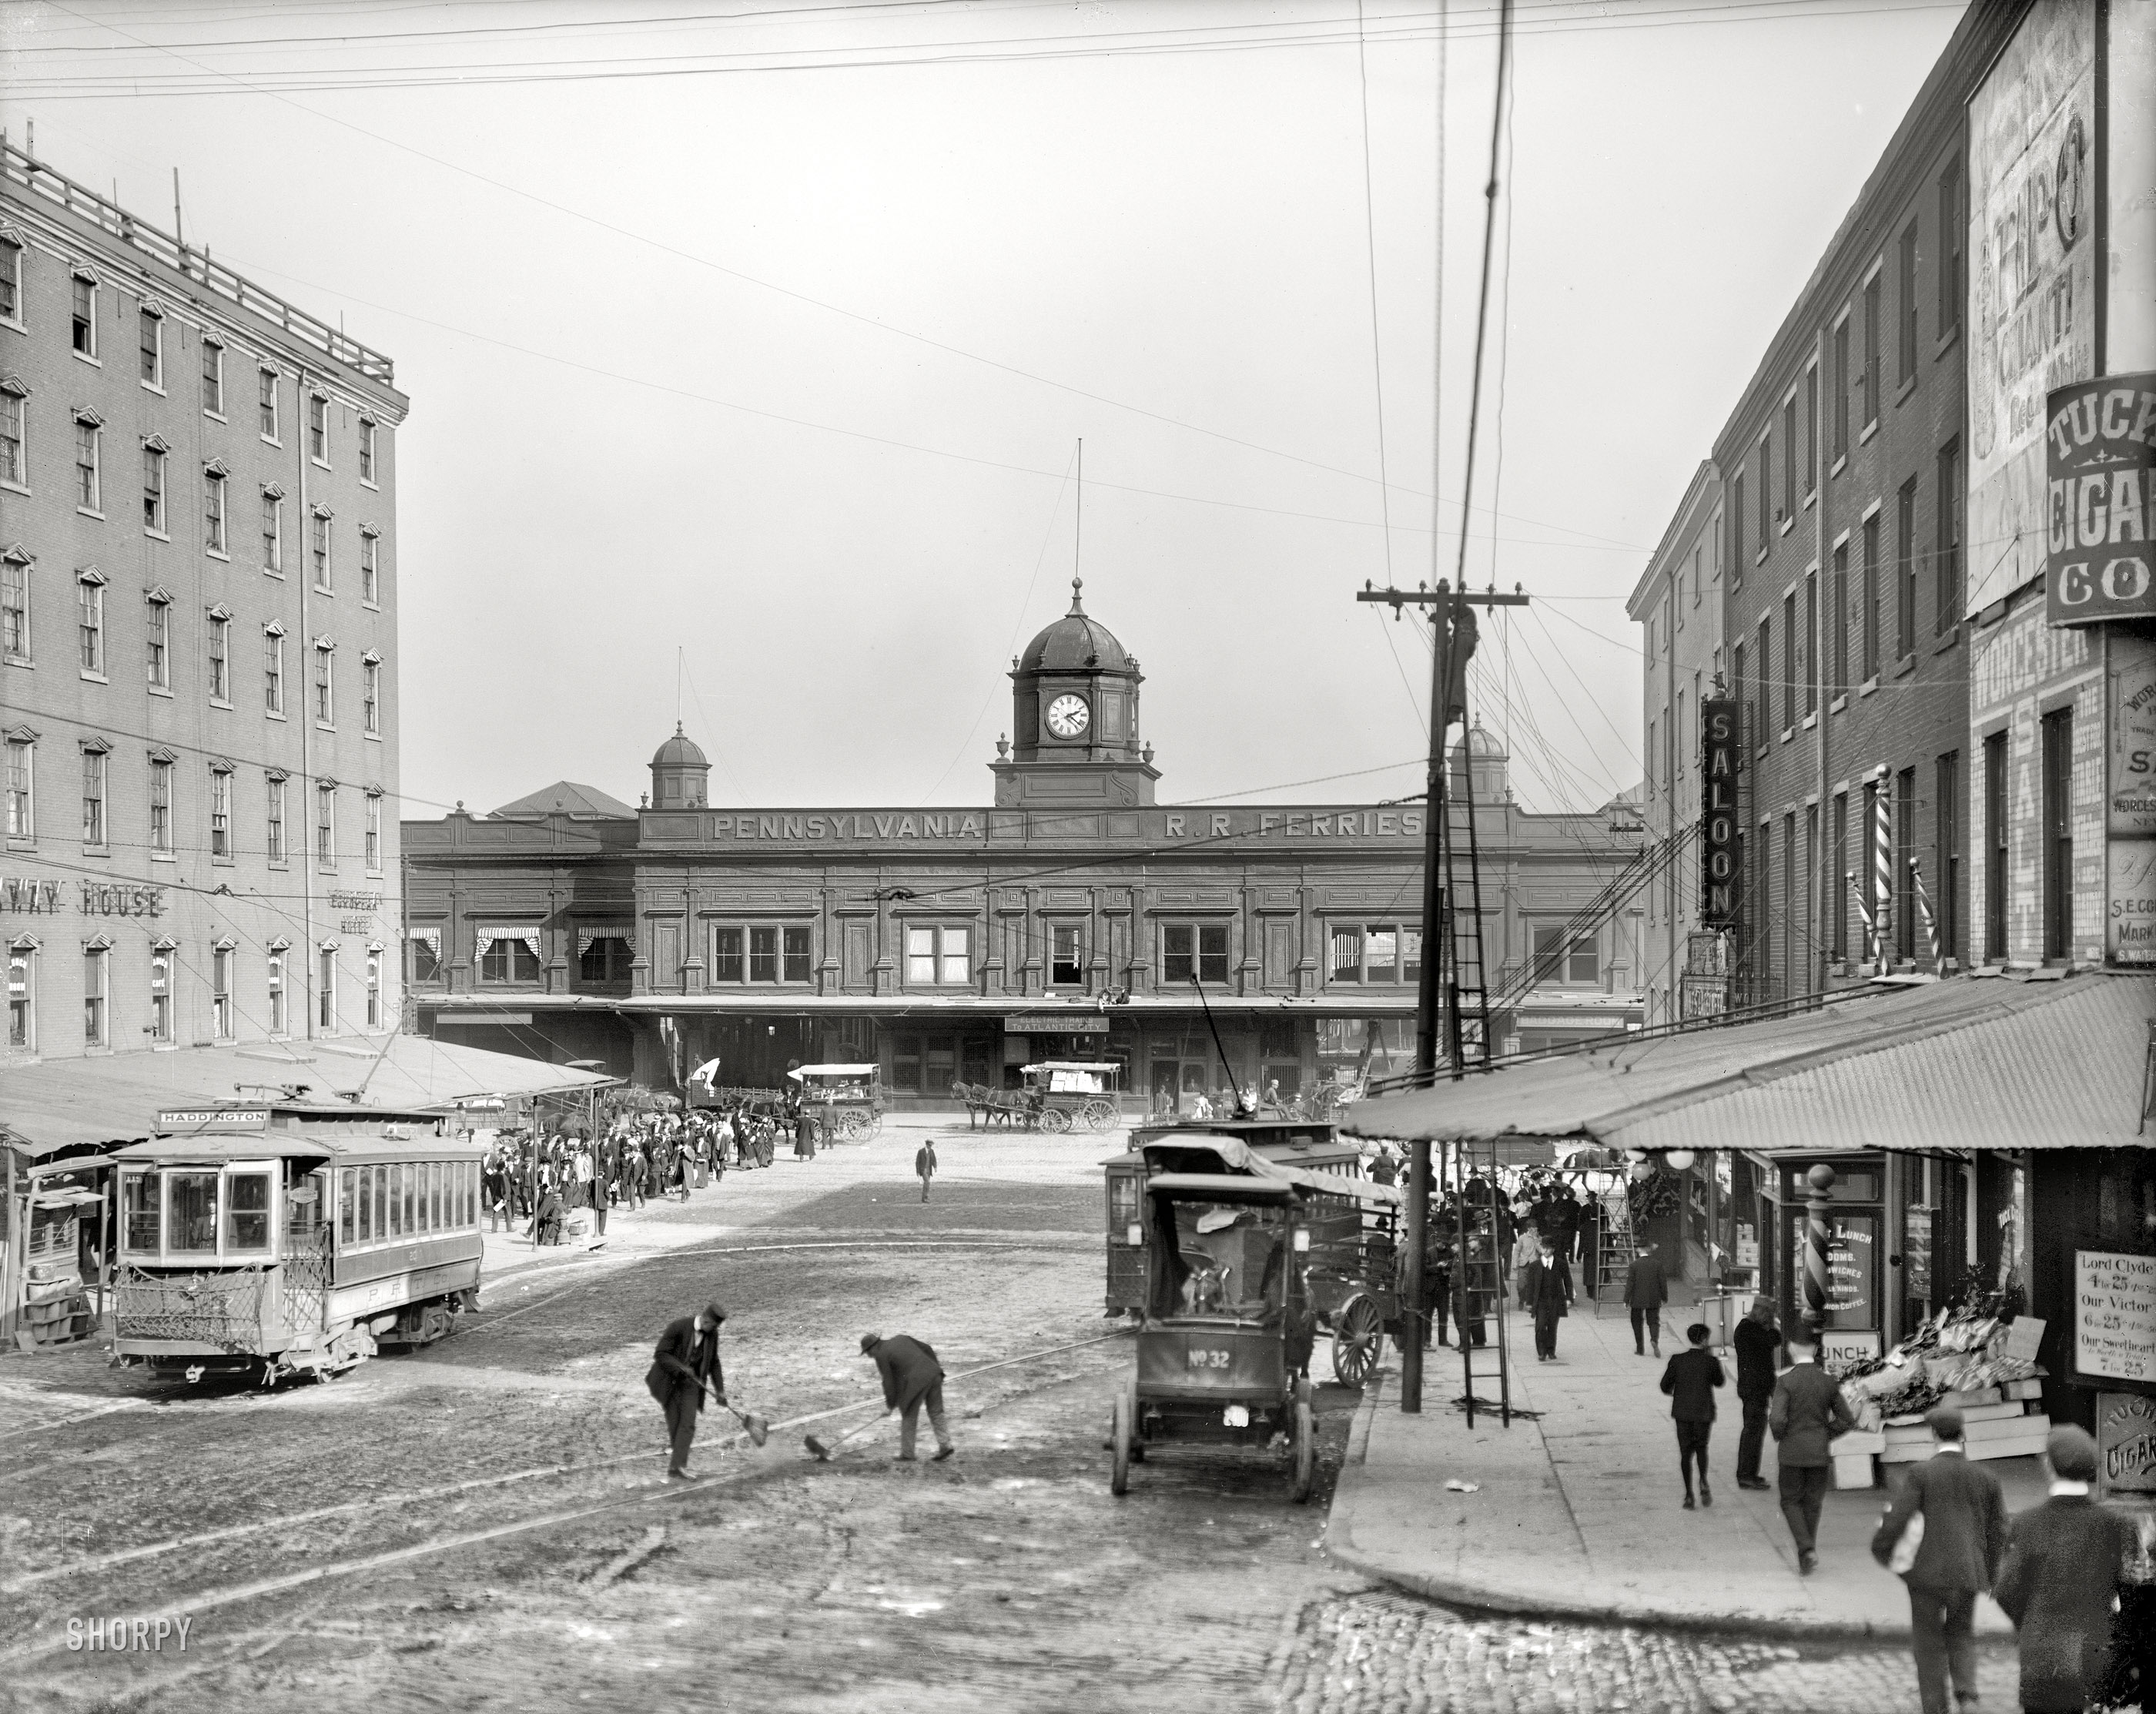 Philadelphia circa 1905. "Pennsylvania Railroad ferry terminal, Market Street." There's a lot going on in this bustling street scene. 8x10 inch dry plate glass negative, Detroit Publishing Company. View full size.